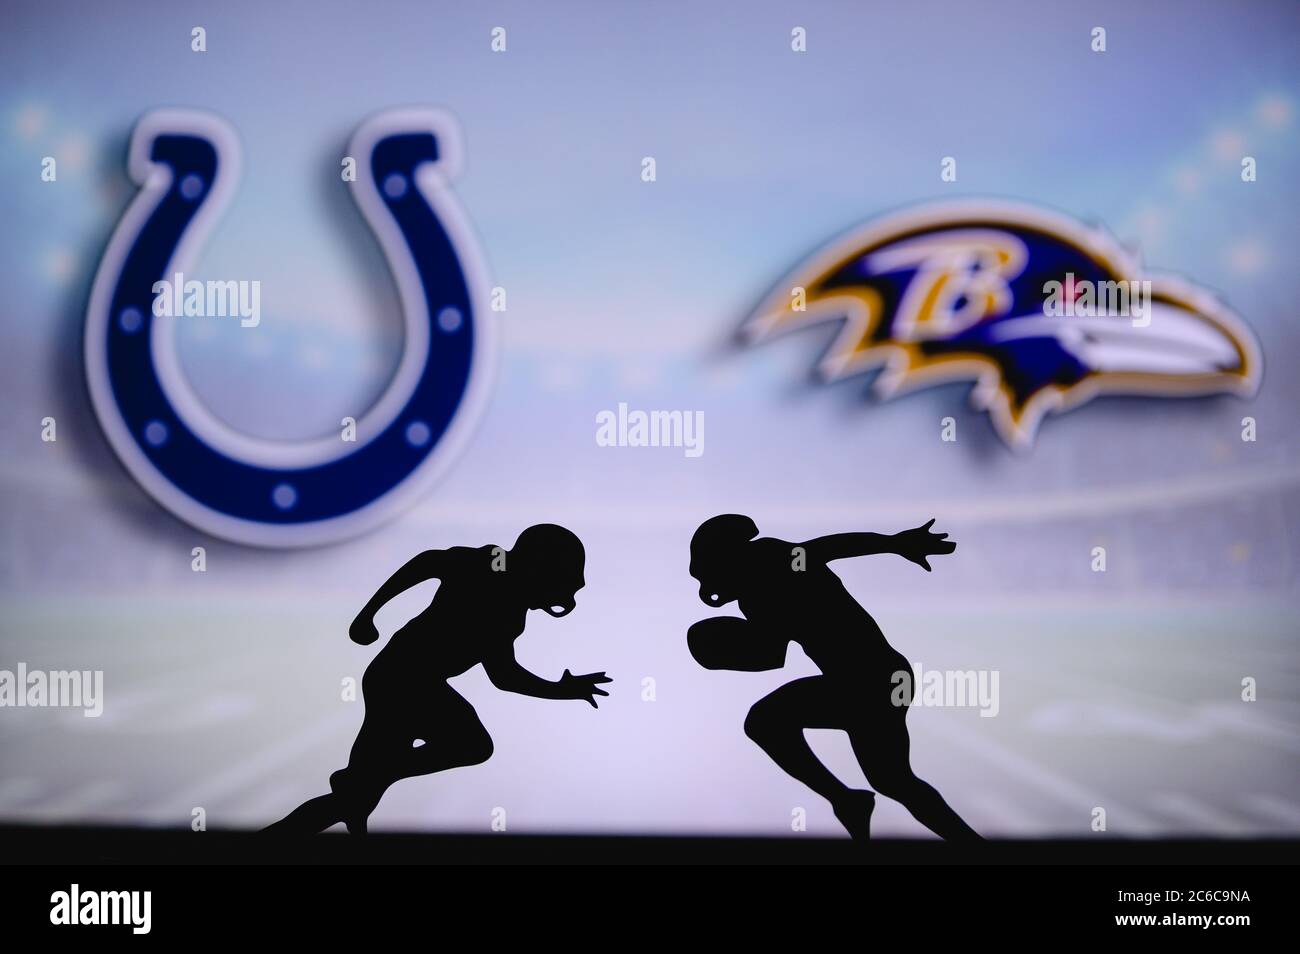 Indianapolis Colts vs. Baltimore Ravens. NFL match poster. Two american football players silhouette facing each other on the field. Clubs logo in back Stock Photo